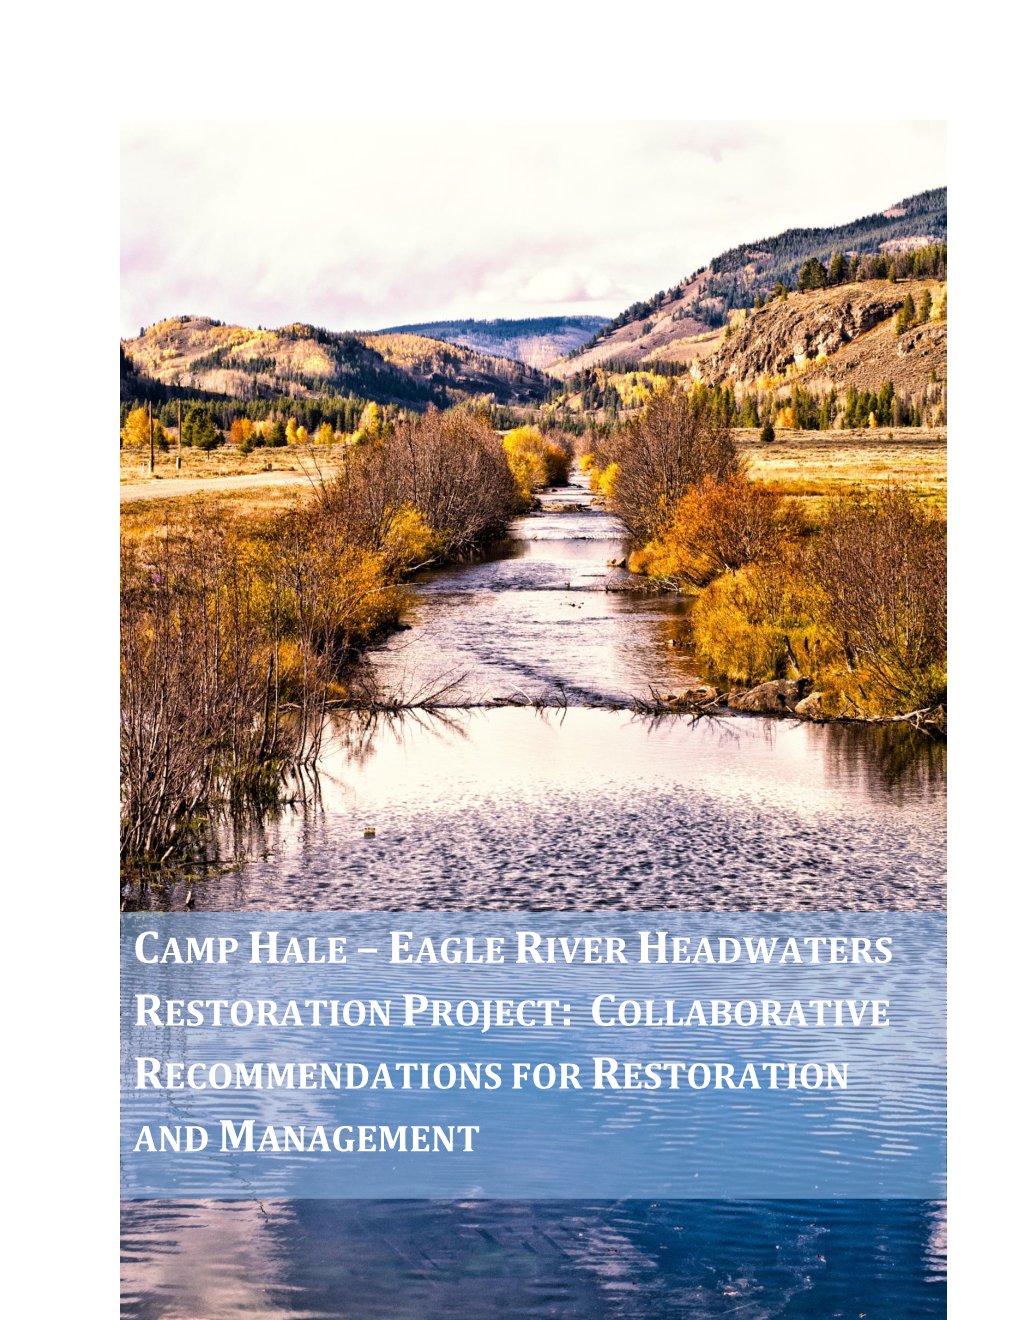 Camp Hale – Eagle River Headwaters Restoration Project: Collaborative Recommendations for Restoration and Management